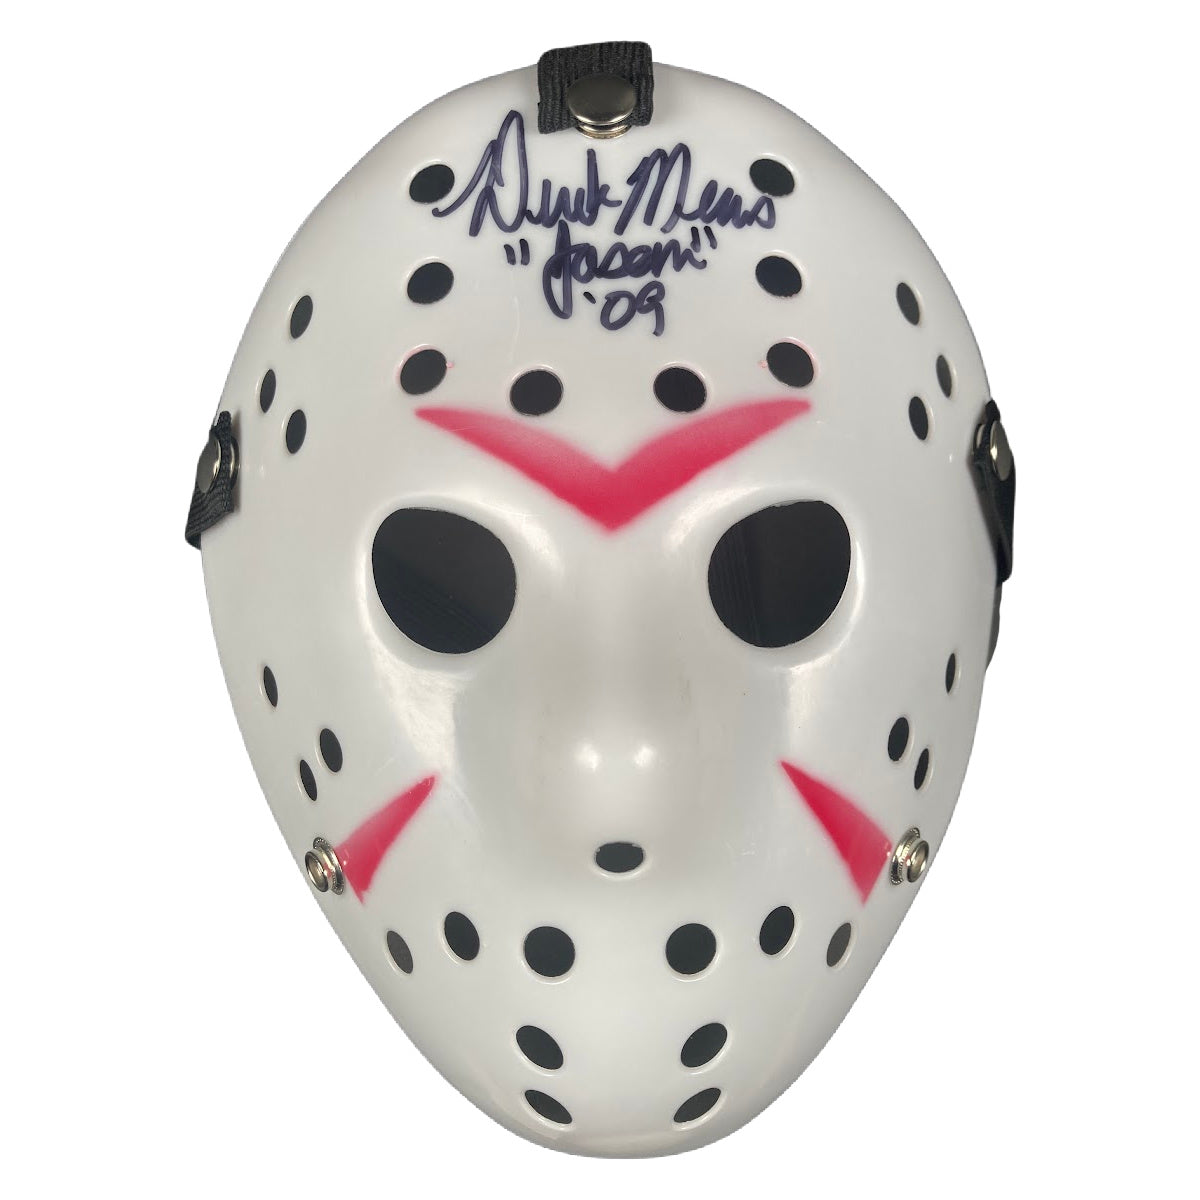 Derek Mears Autographed Friday the 13th Jason Voorhees Mask Signed JSA COA